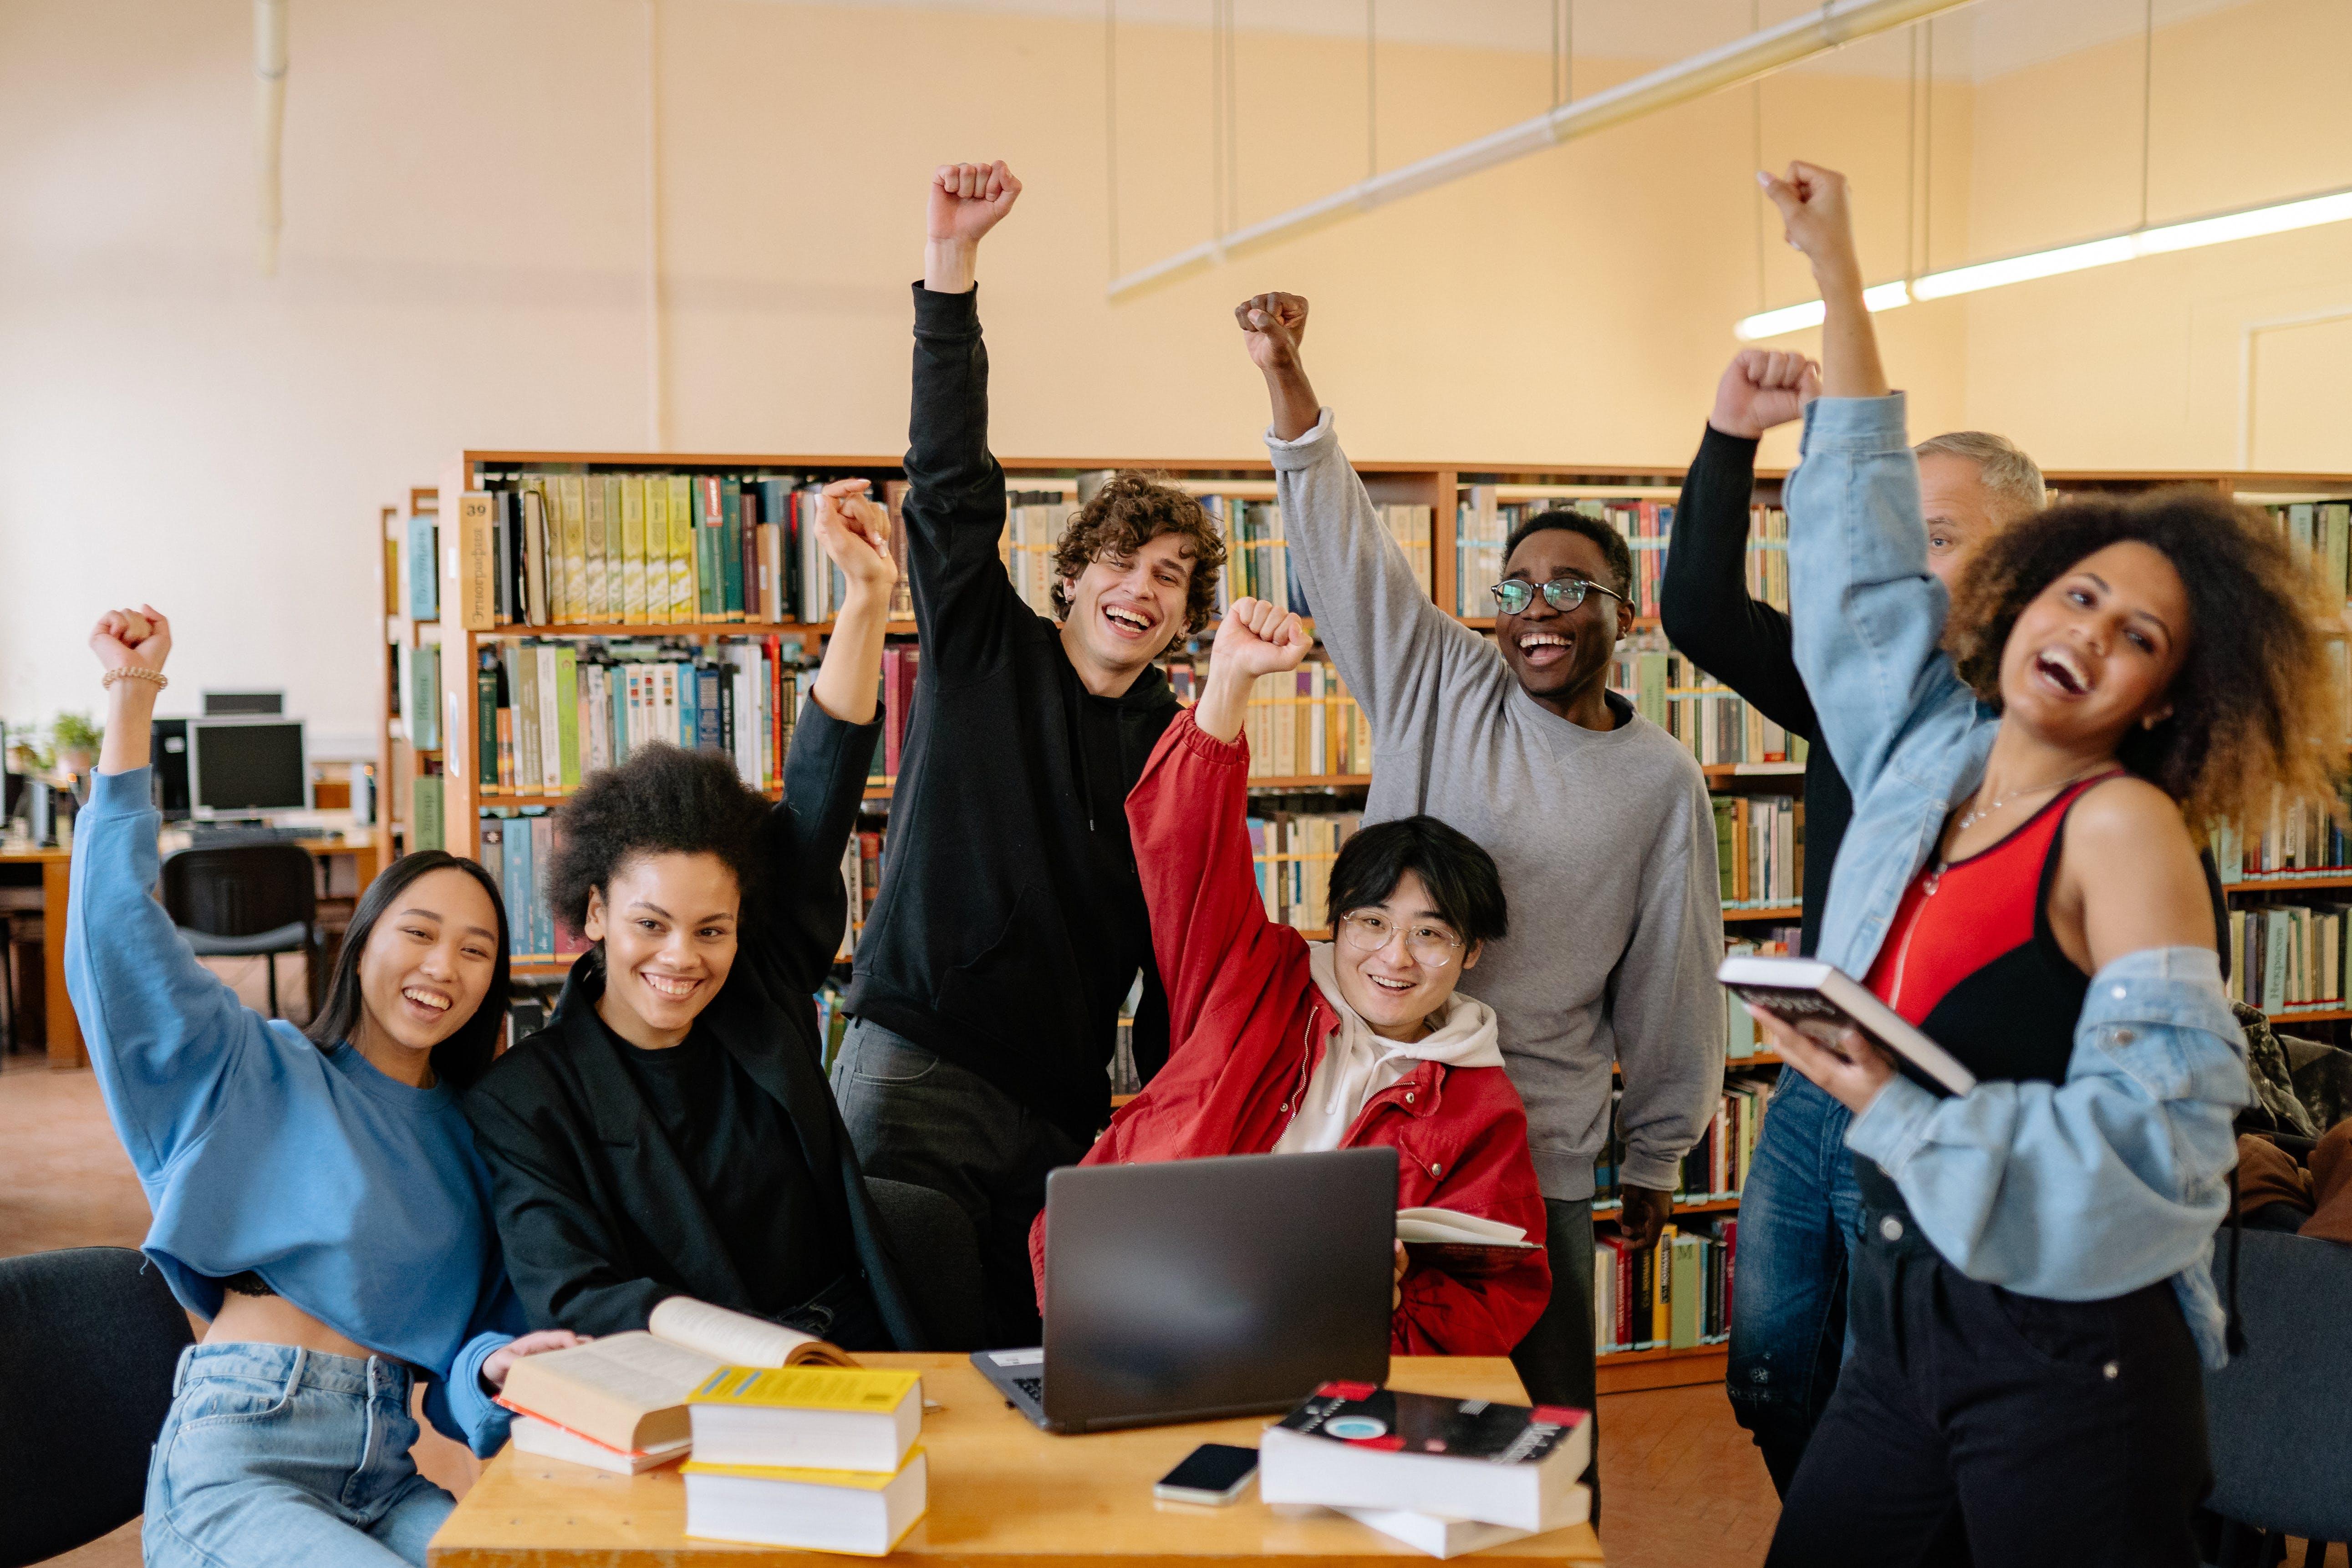 Group of students in a library raising their hands